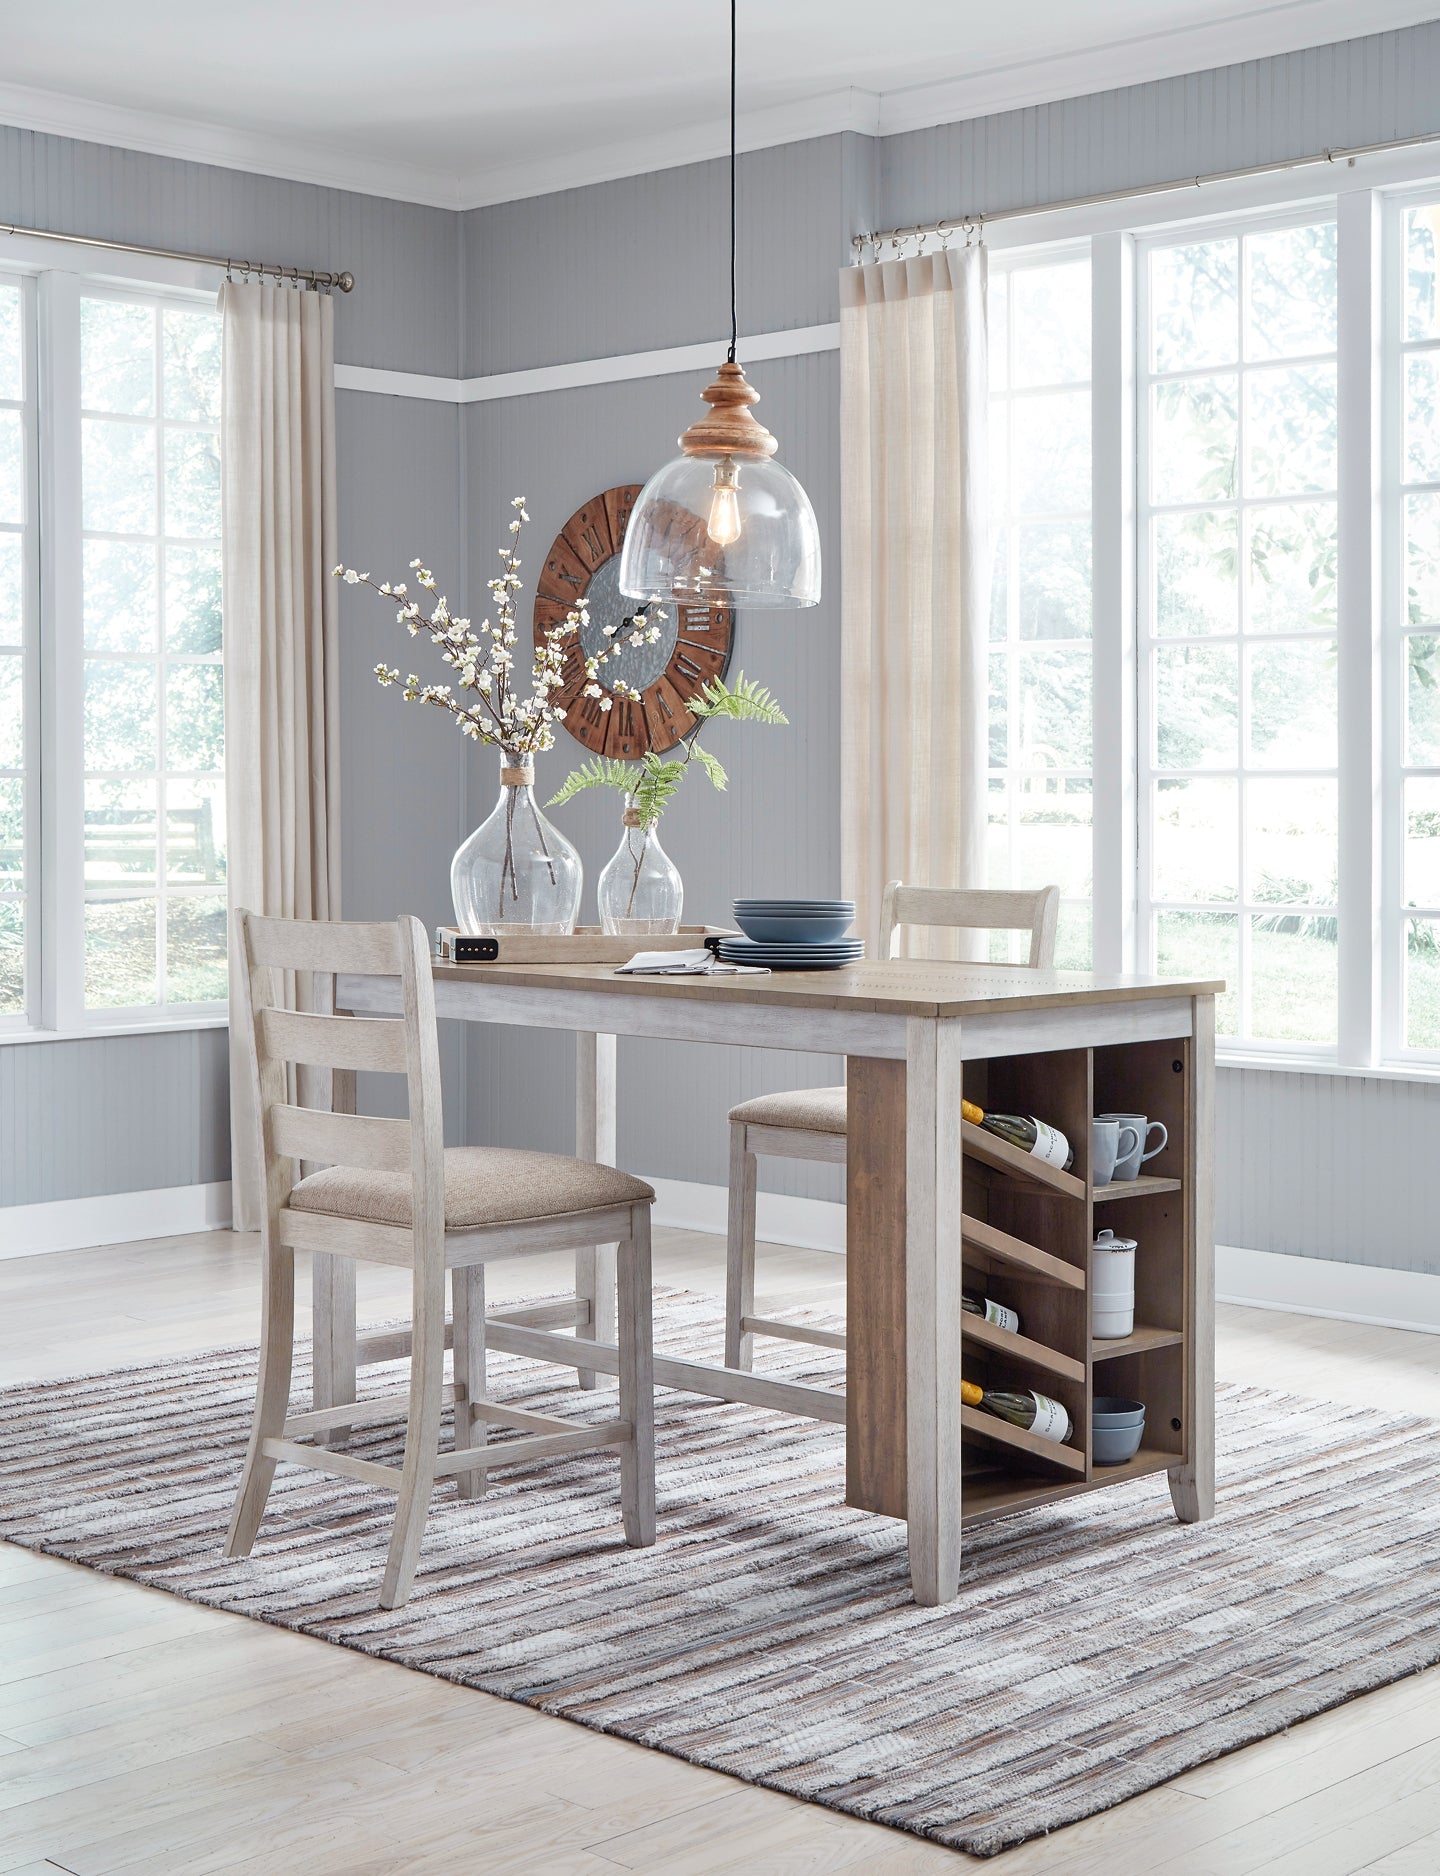 Skempton Counter Height Dining Table and 2 Barstools Wilson Furniture (OH)  in Bridgeport, Ohio. Serving Bridgeport, Yorkville, Bellaire, & Avondale